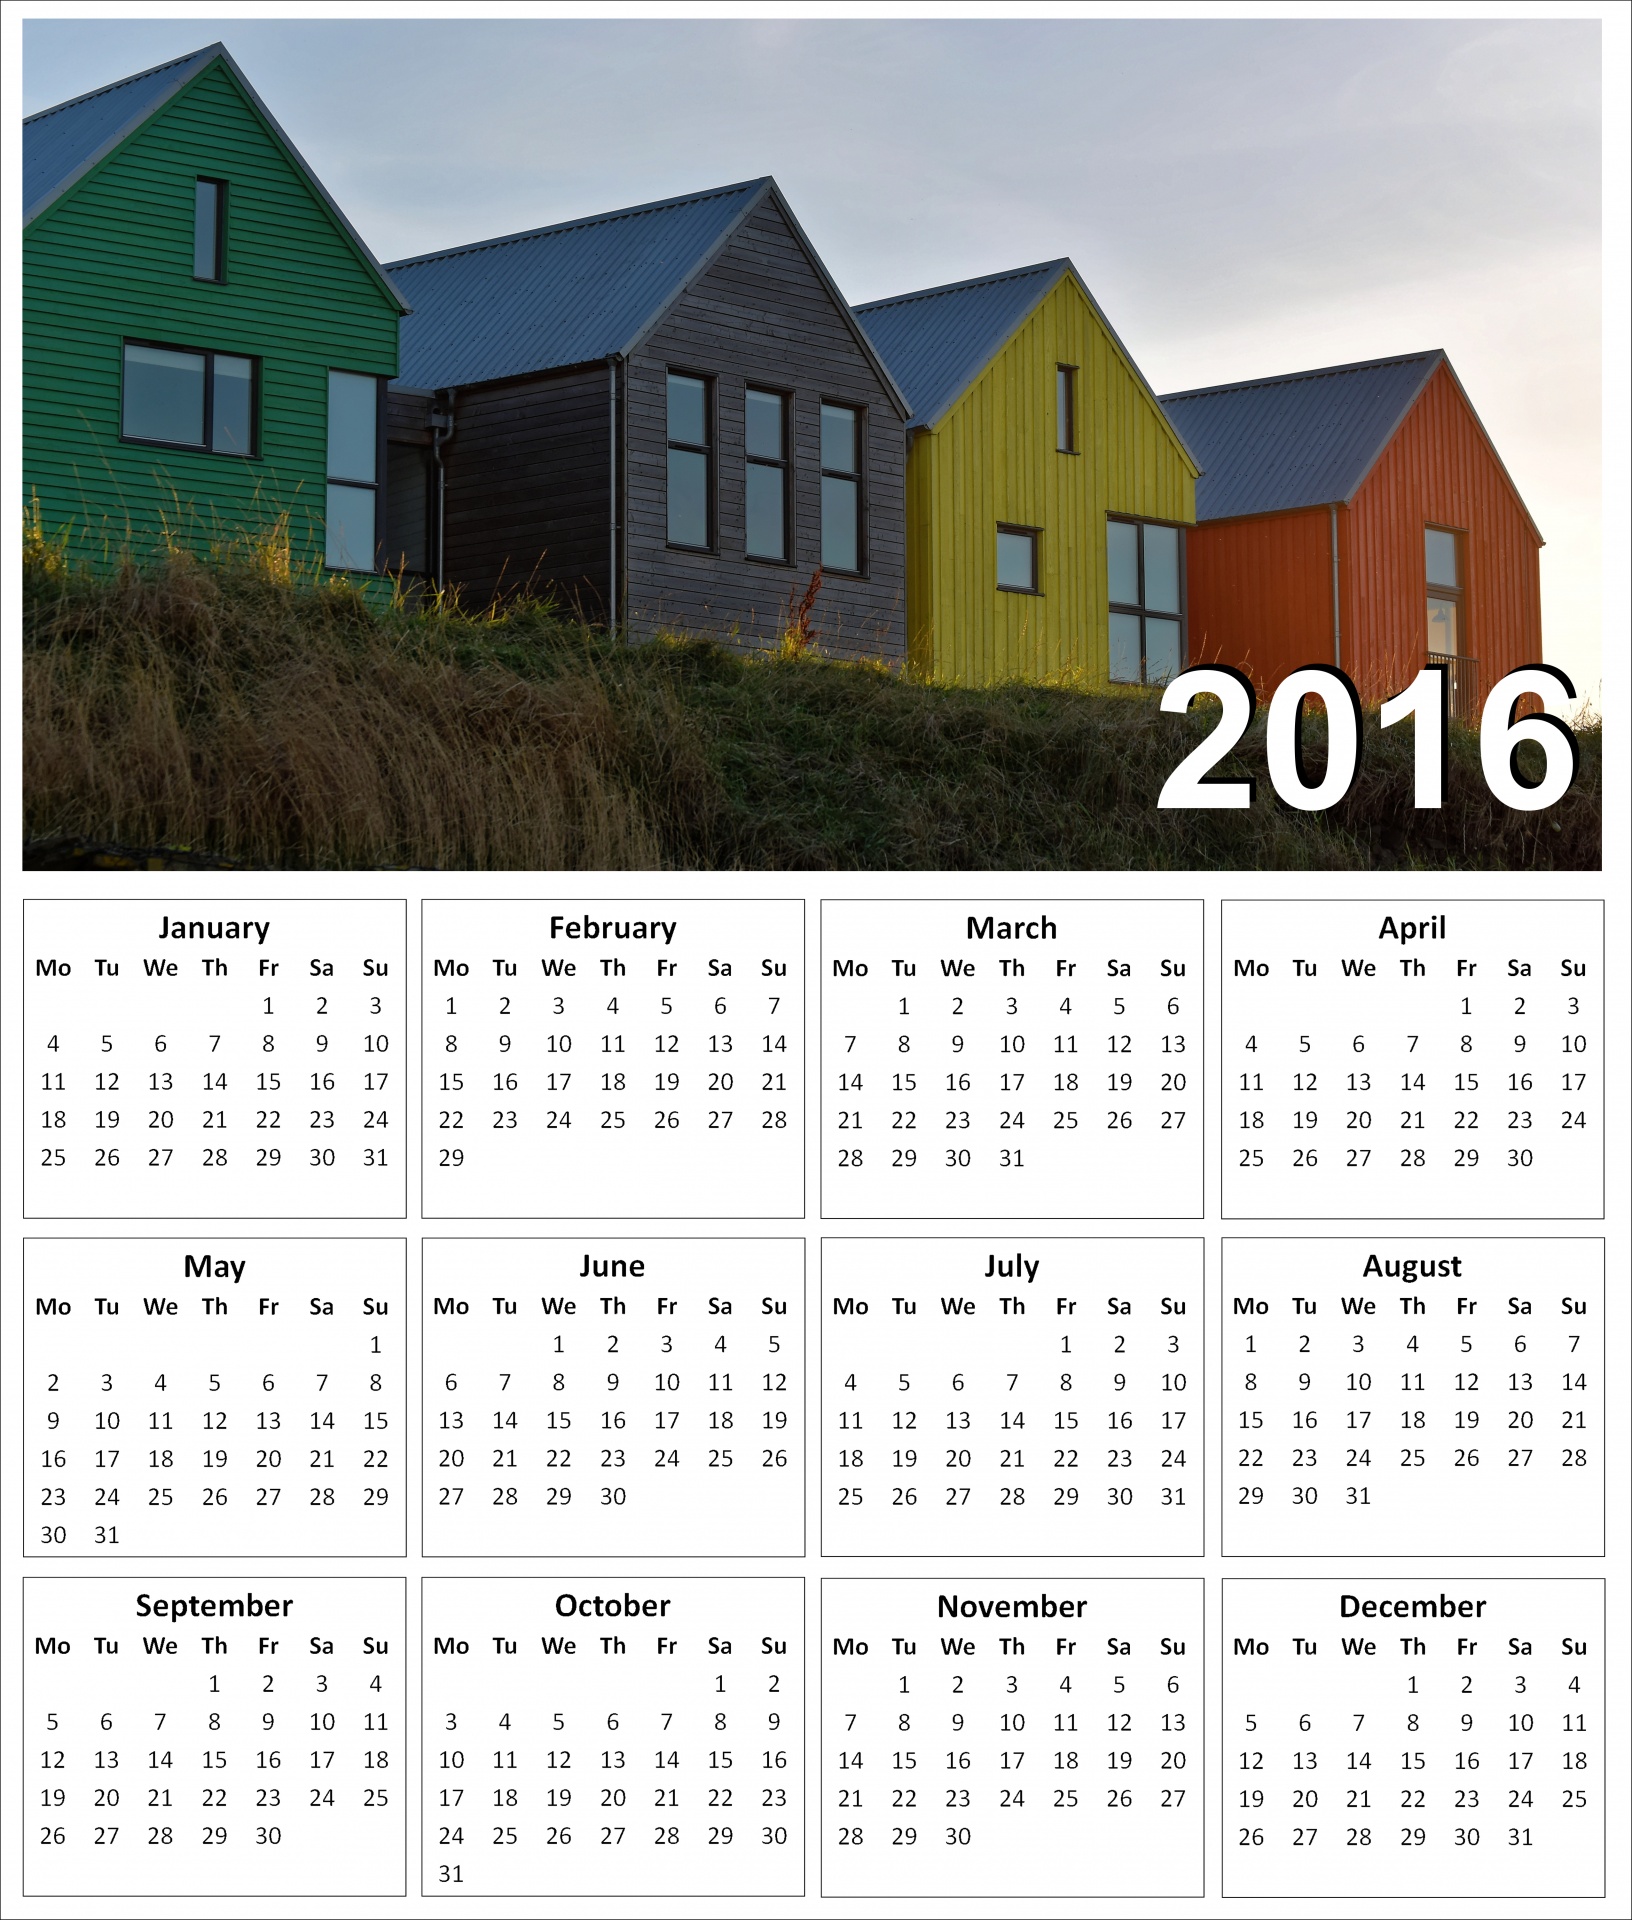 2016 Wall Calendar with a Coloured houses Image